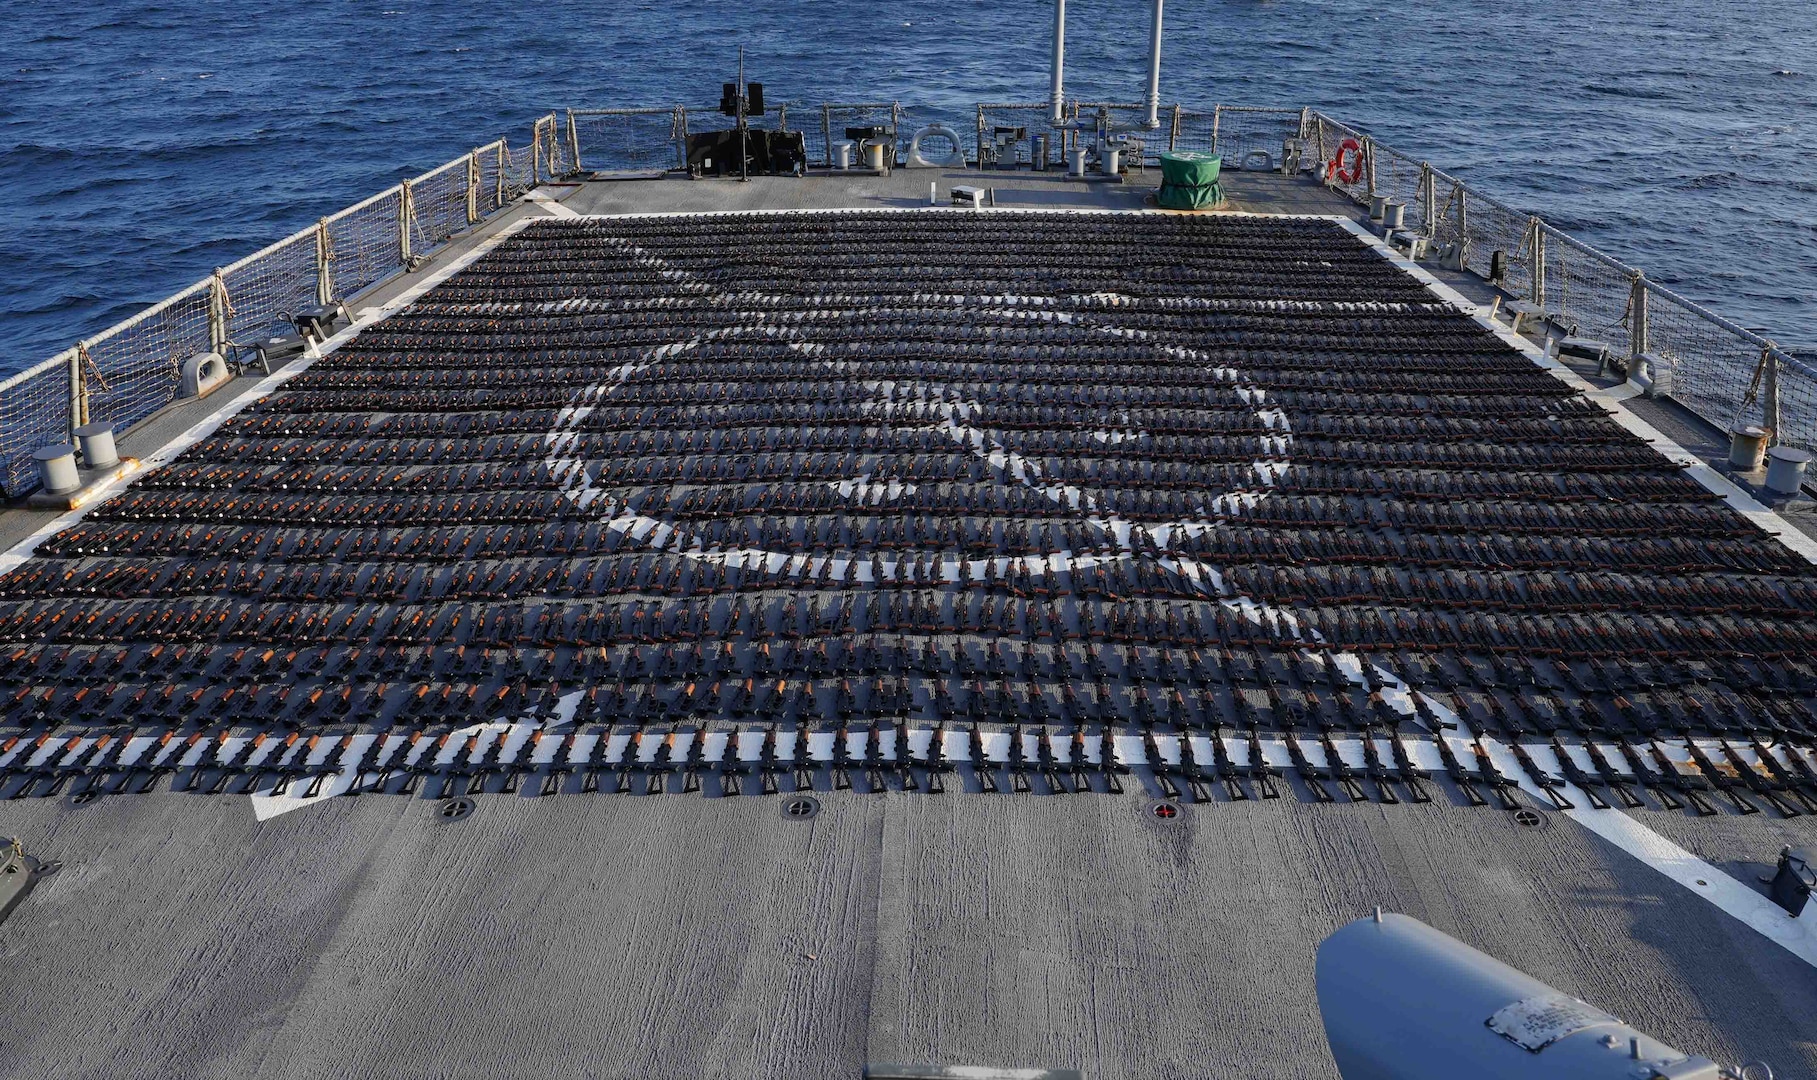 TAMPA, Fla. - On Jan. 6, US Central Command forces intercepted a stateless dhow in the Gulf of Oman smuggling more than 2,000 AK-47 assault rifles while transiting international waters from Iran to Yemen.
The vessel was sailing on a route historically used to traffic weapons to the Houthis in Yemen. A team from the USS Chinook patrol coastal ship boarded the vessel with support from the Cyclone-class patrol ship USS Monsoon and the guided-missile destroyer USS The Sullivans.